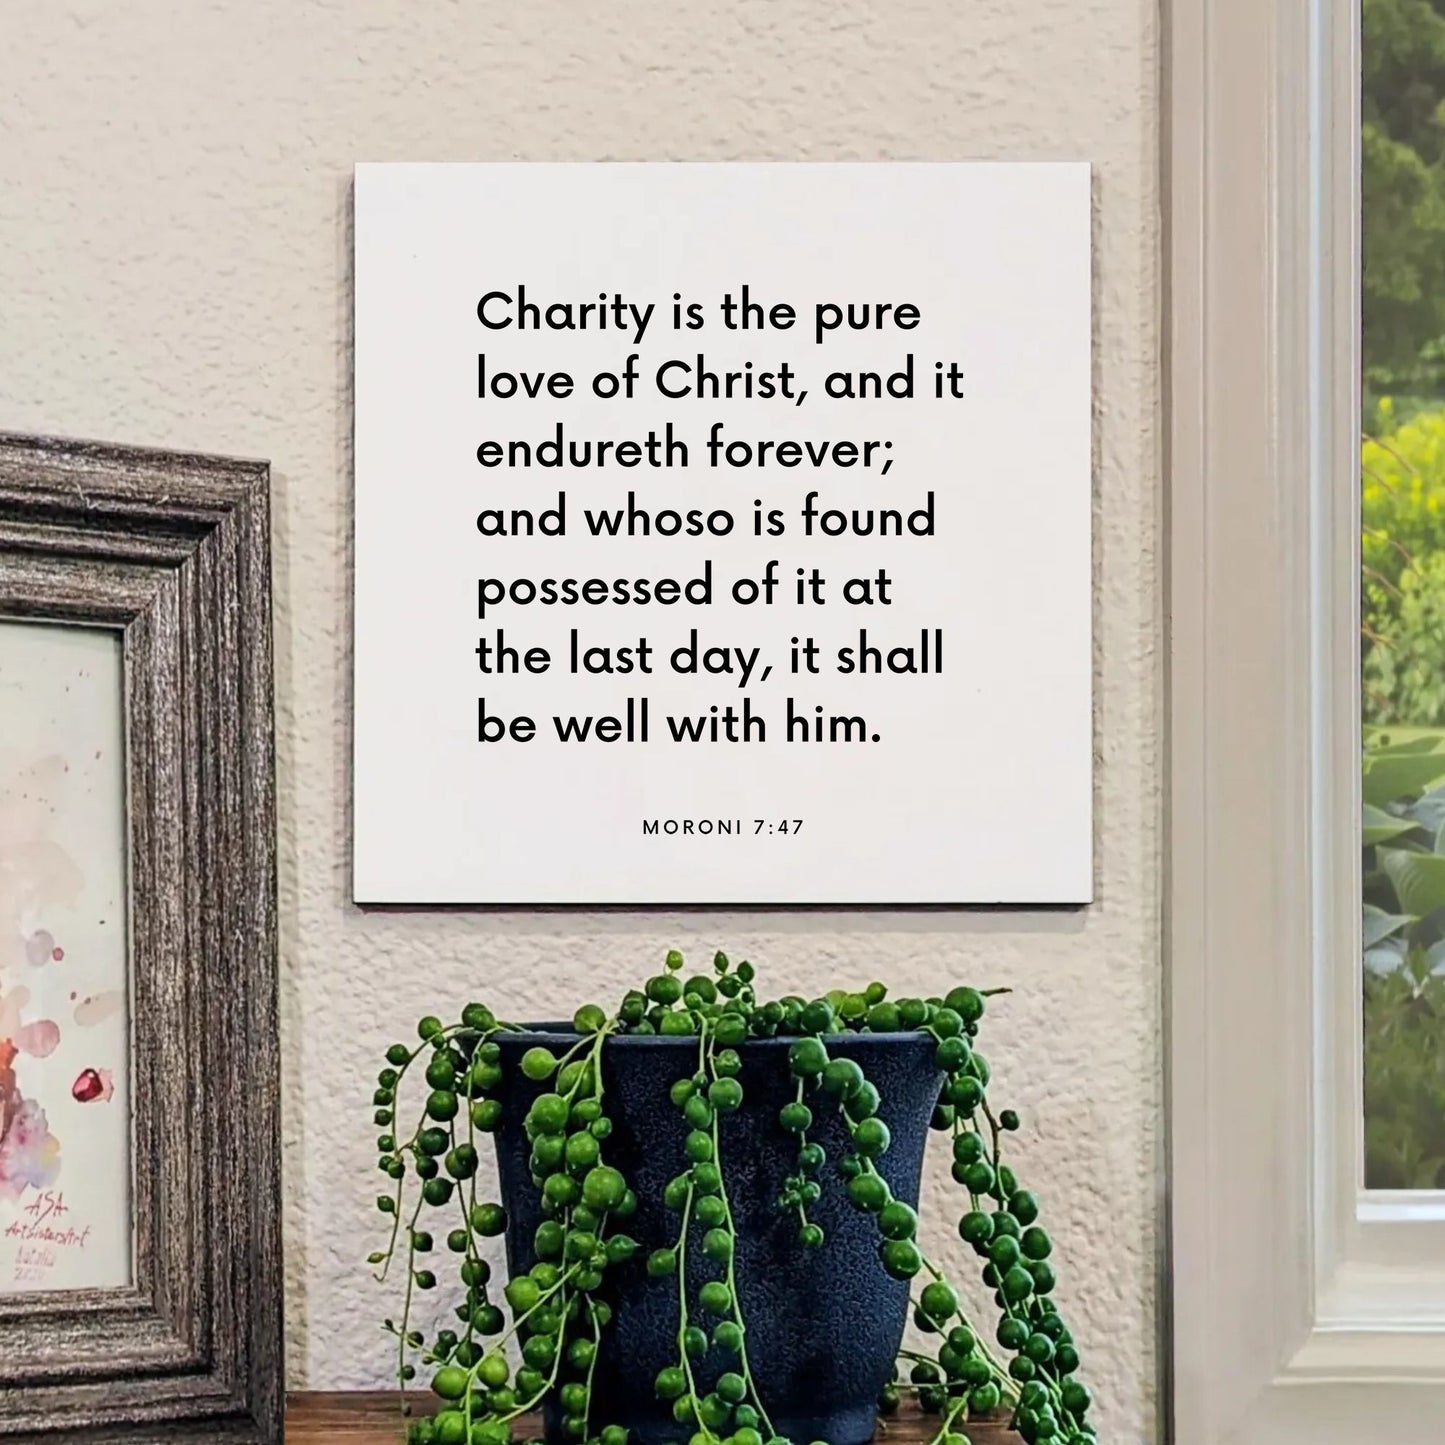 Window mouting of the scripture tile for Moroni 7:47 - "Charity is the pure love of Christ"